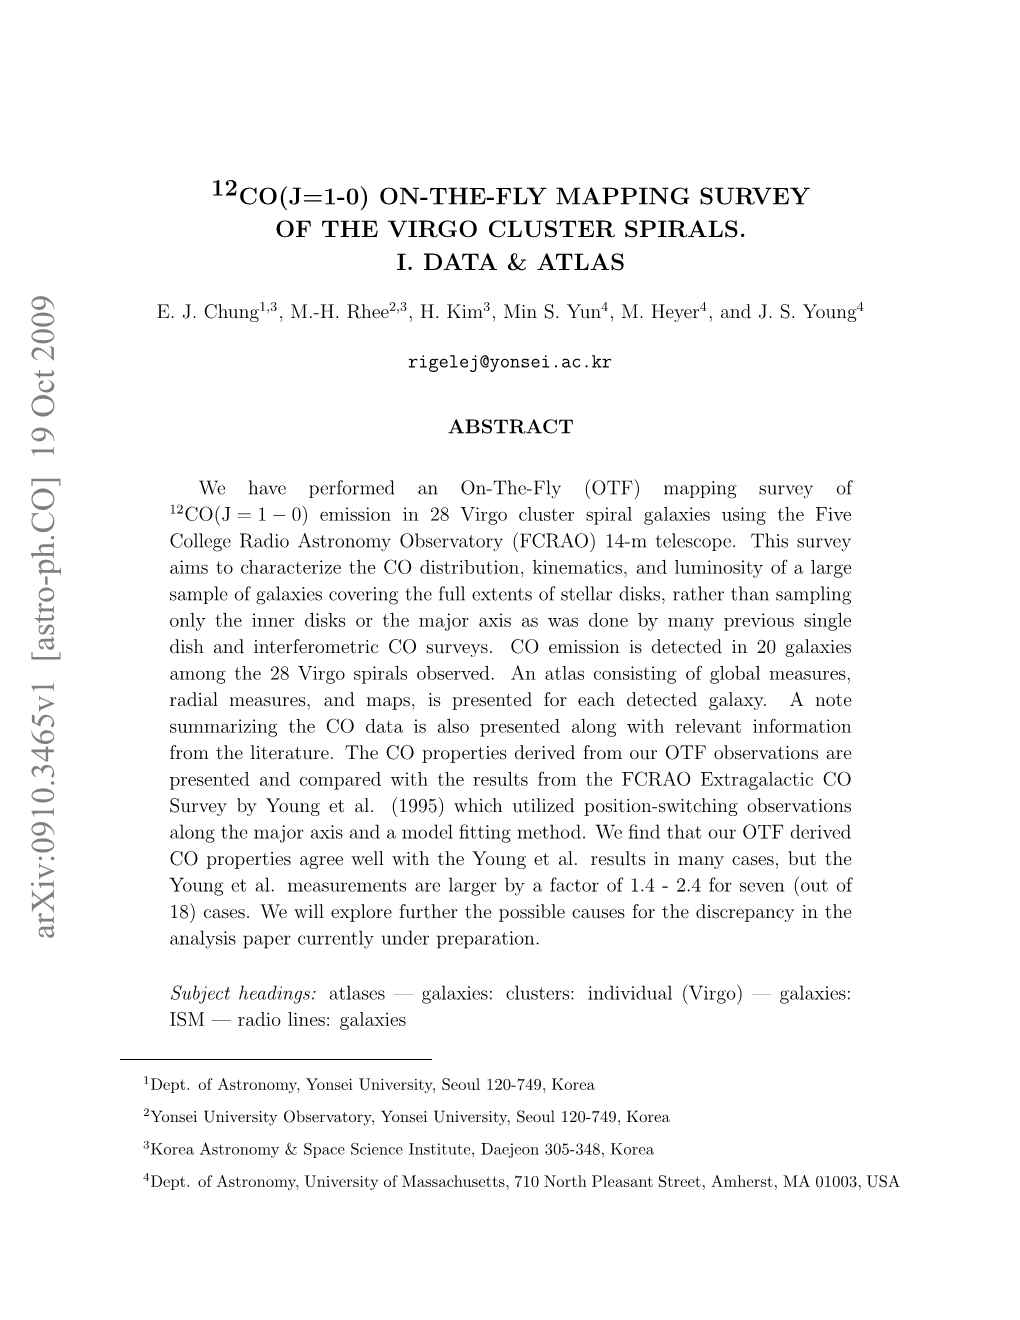 12Co (J= 1-0) On-The-Fly Mapping Survey of the Virgo Cluster Spirals. I